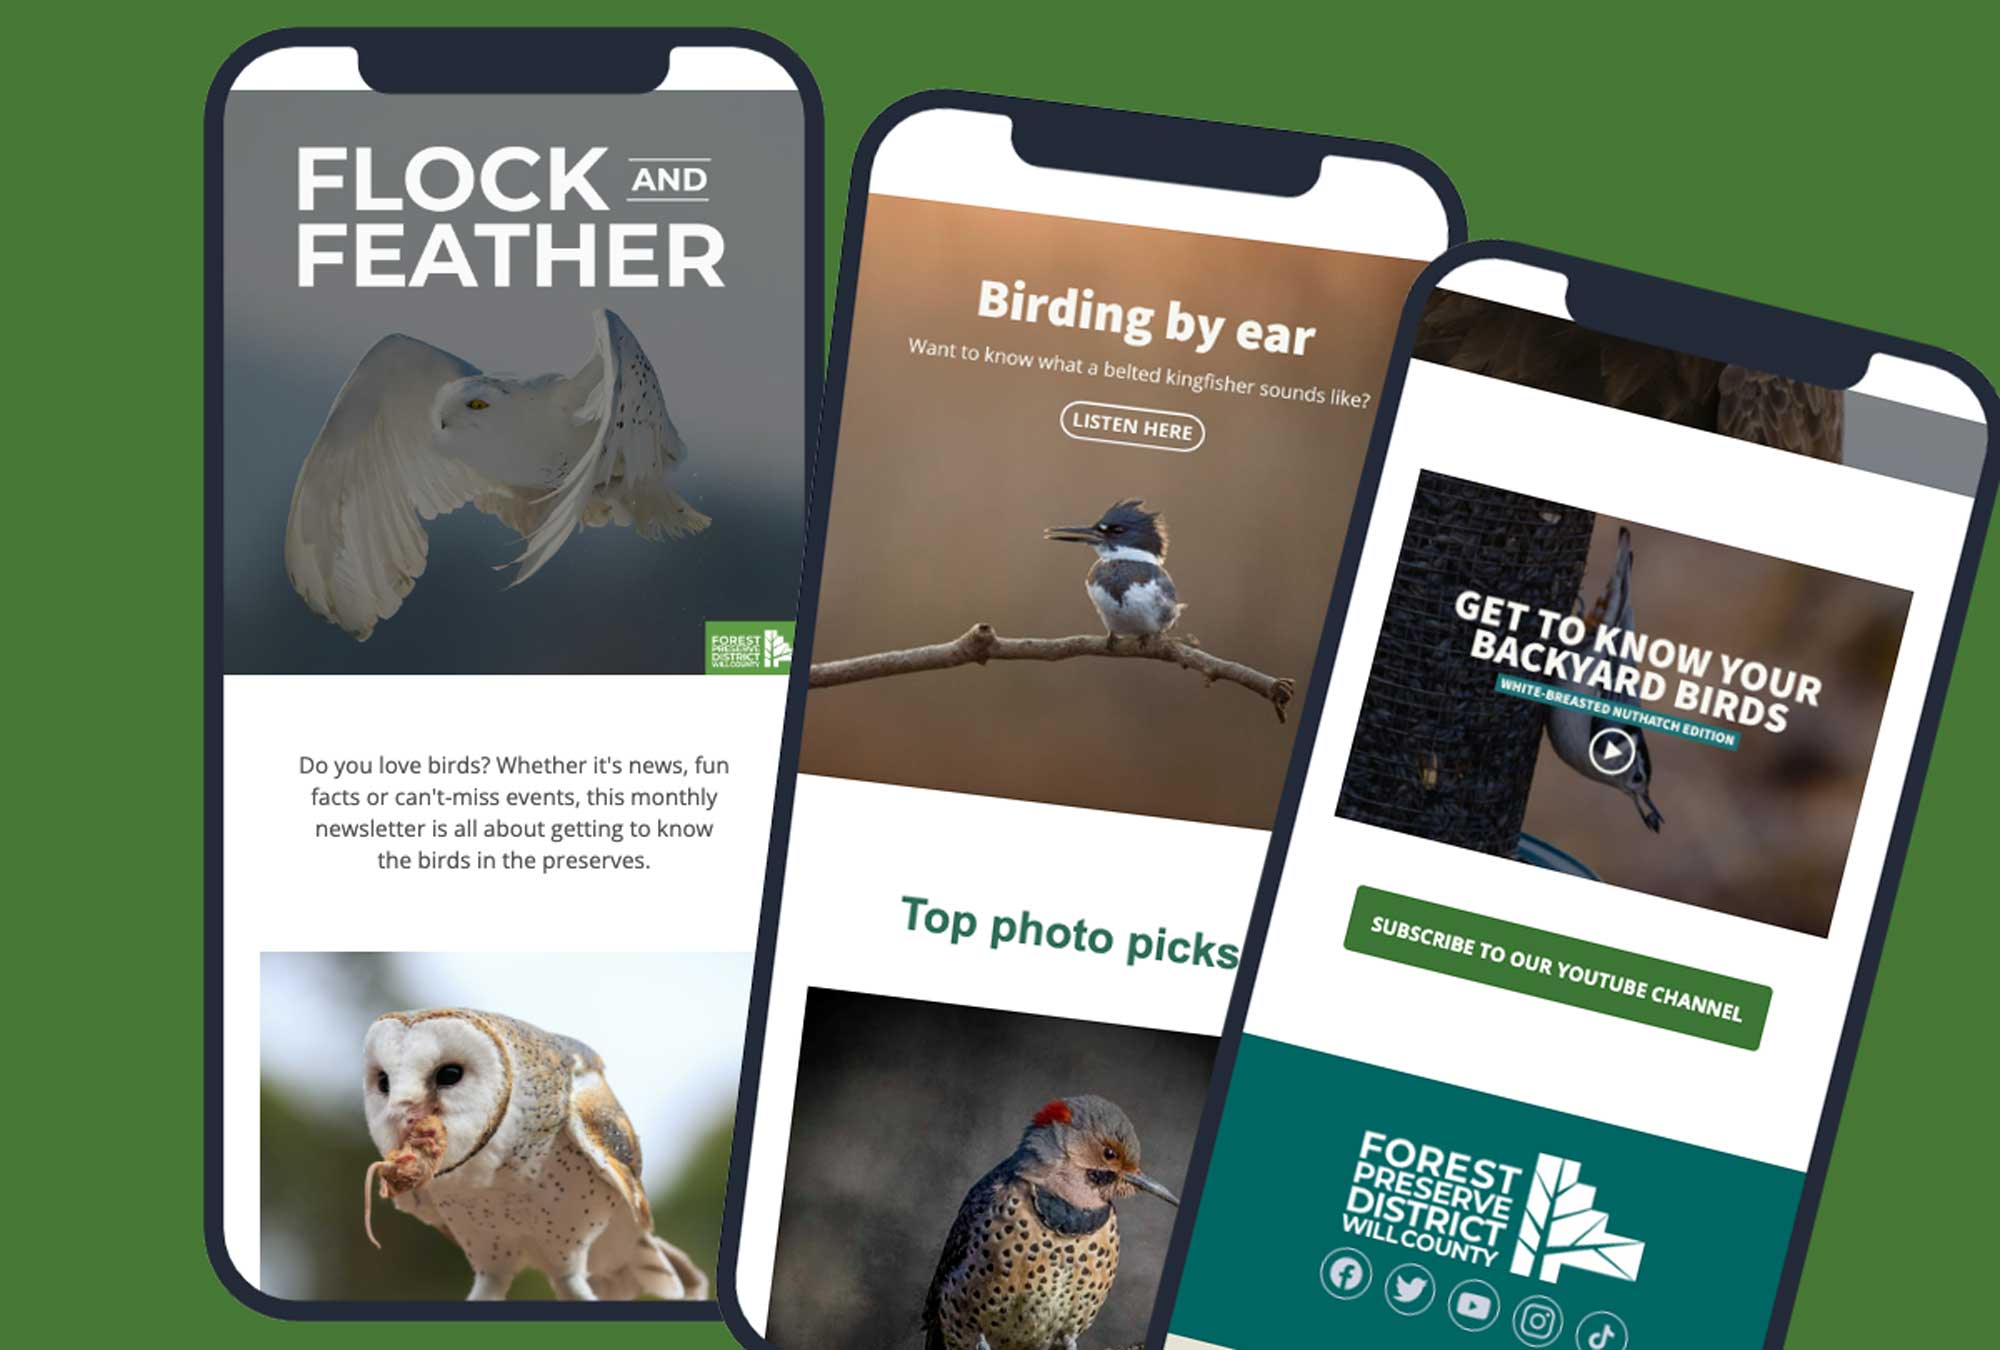 Screen images from digital newsletter on birds